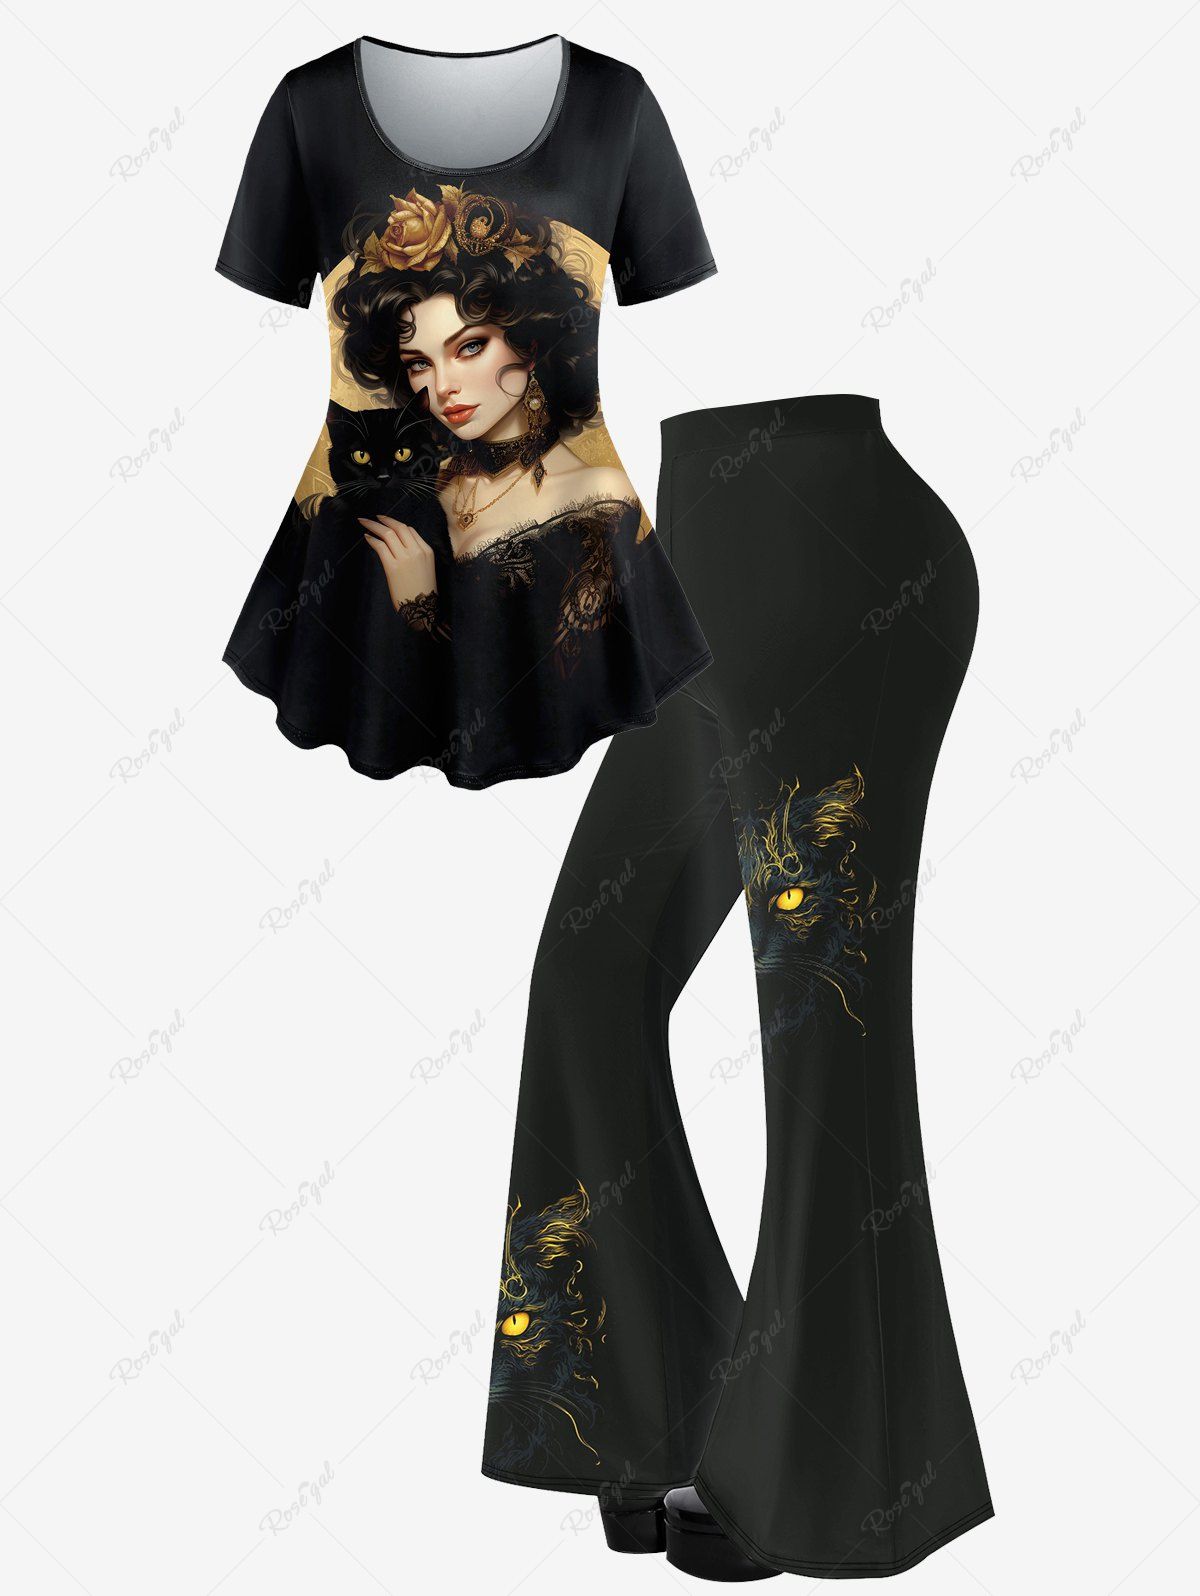 Trendy Woman Flower Cat Print Short Sleeves T-shirt And Cat Print Flare Pants Gothic Outfit  